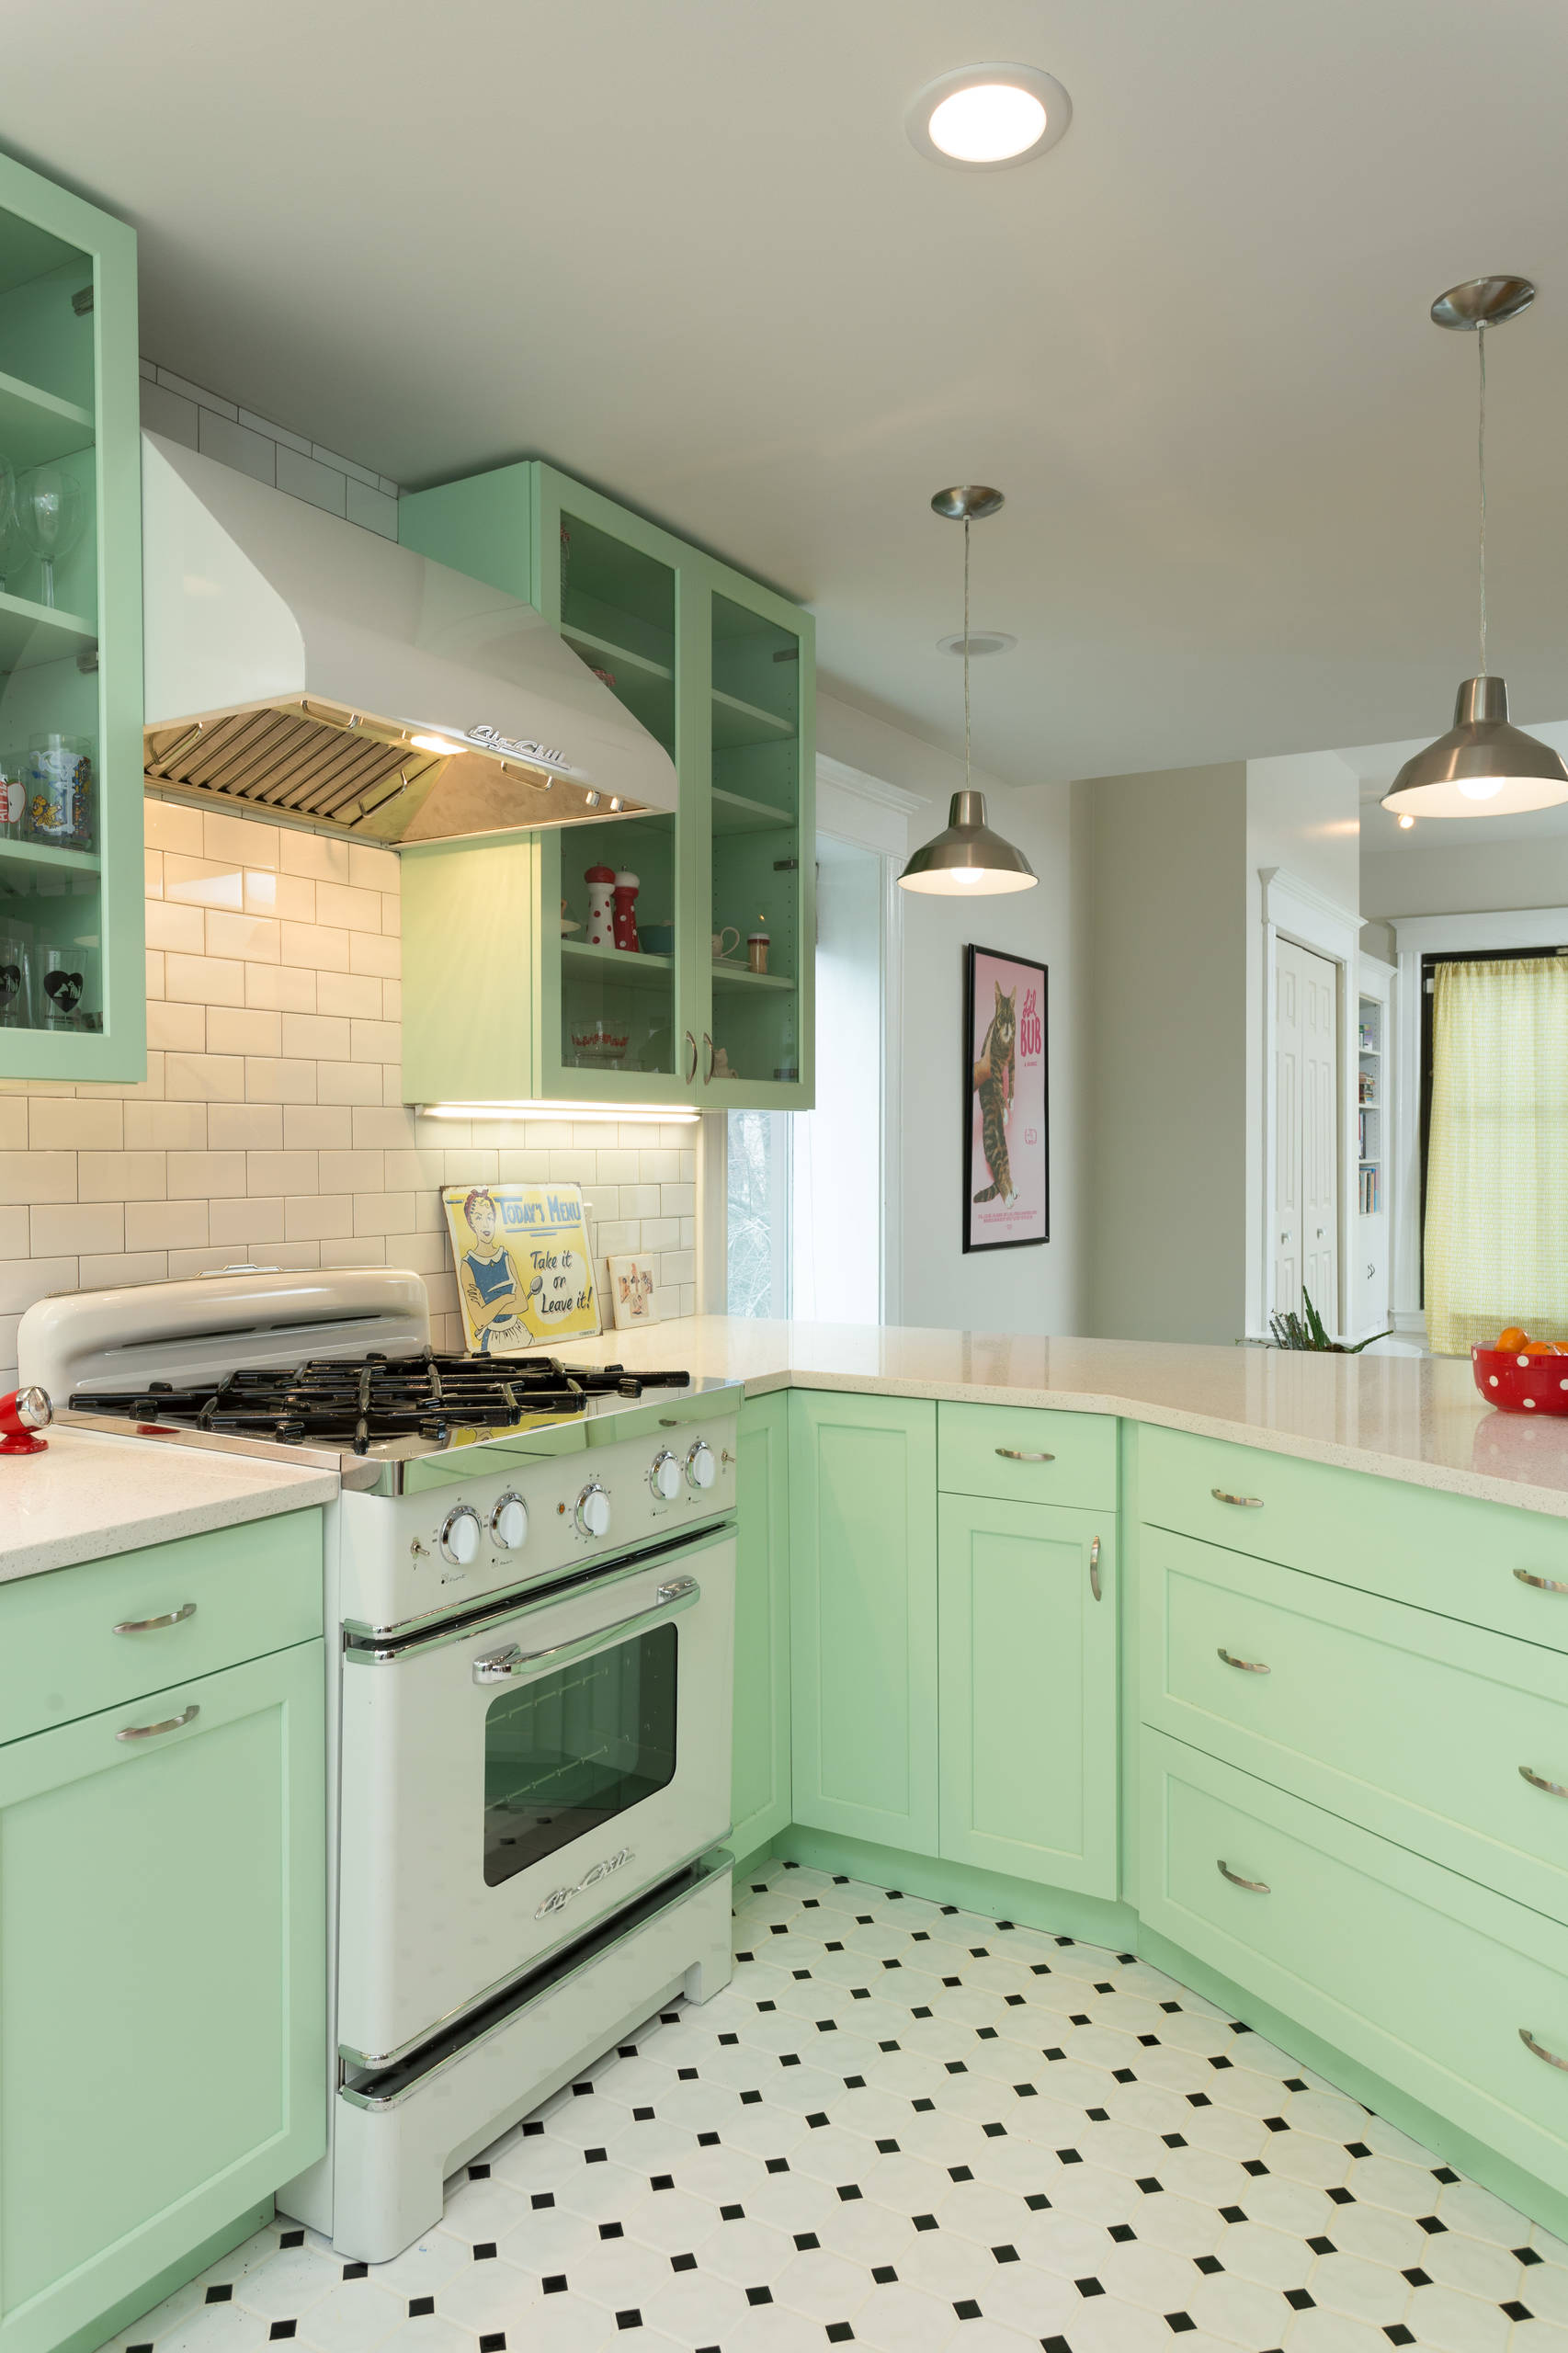 https://st.hzcdn.com/simgs/pictures/kitchens/retro-kitchen-remodel-in-humboldt-park-chicago-chi-renovation-and-design-img~42611dcd06fdc523_14-7135-1-a2bdfc7.jpg